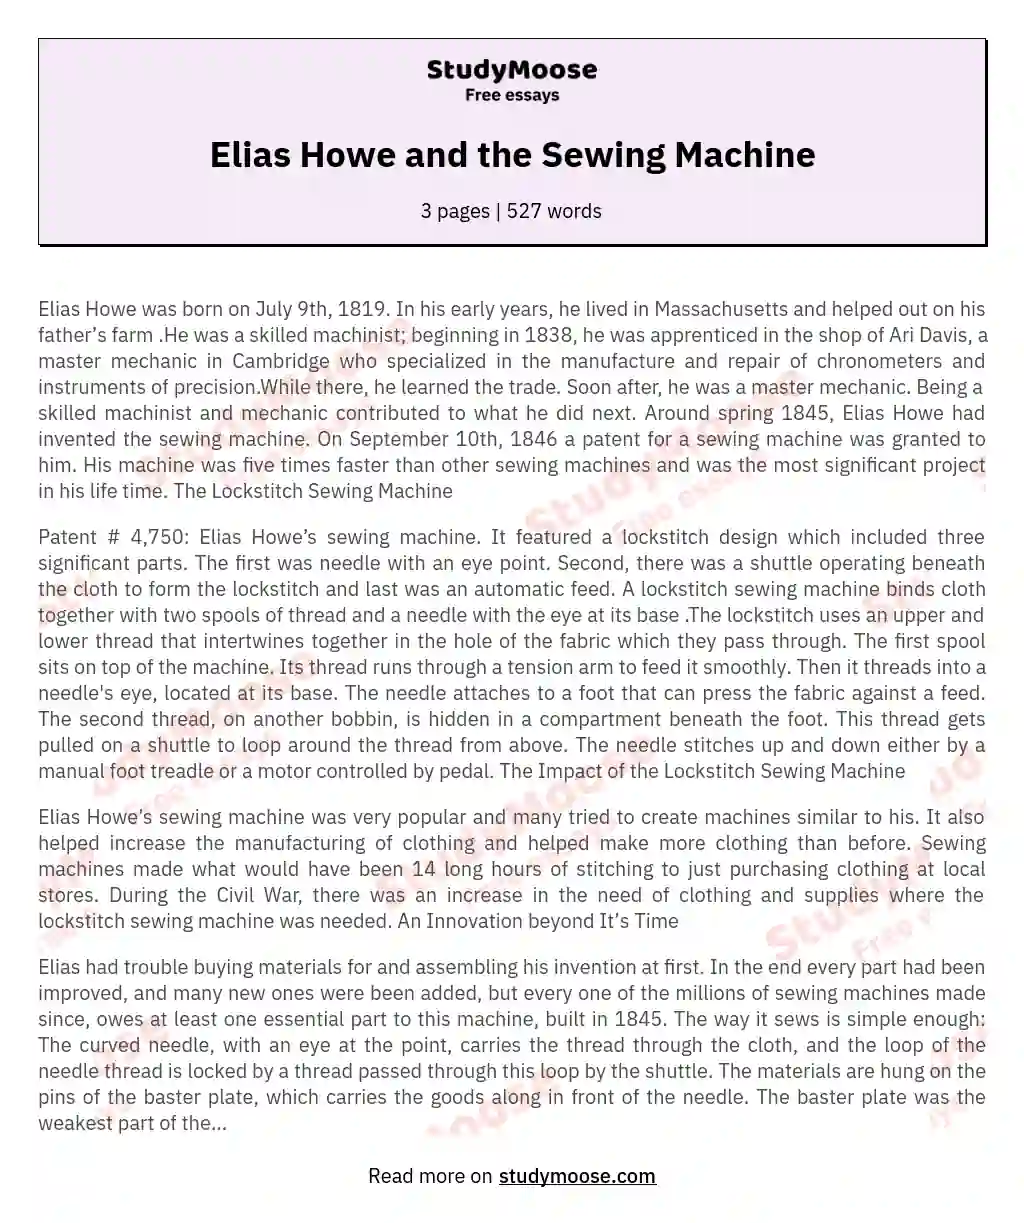 Elias Howe and the Sewing Machine